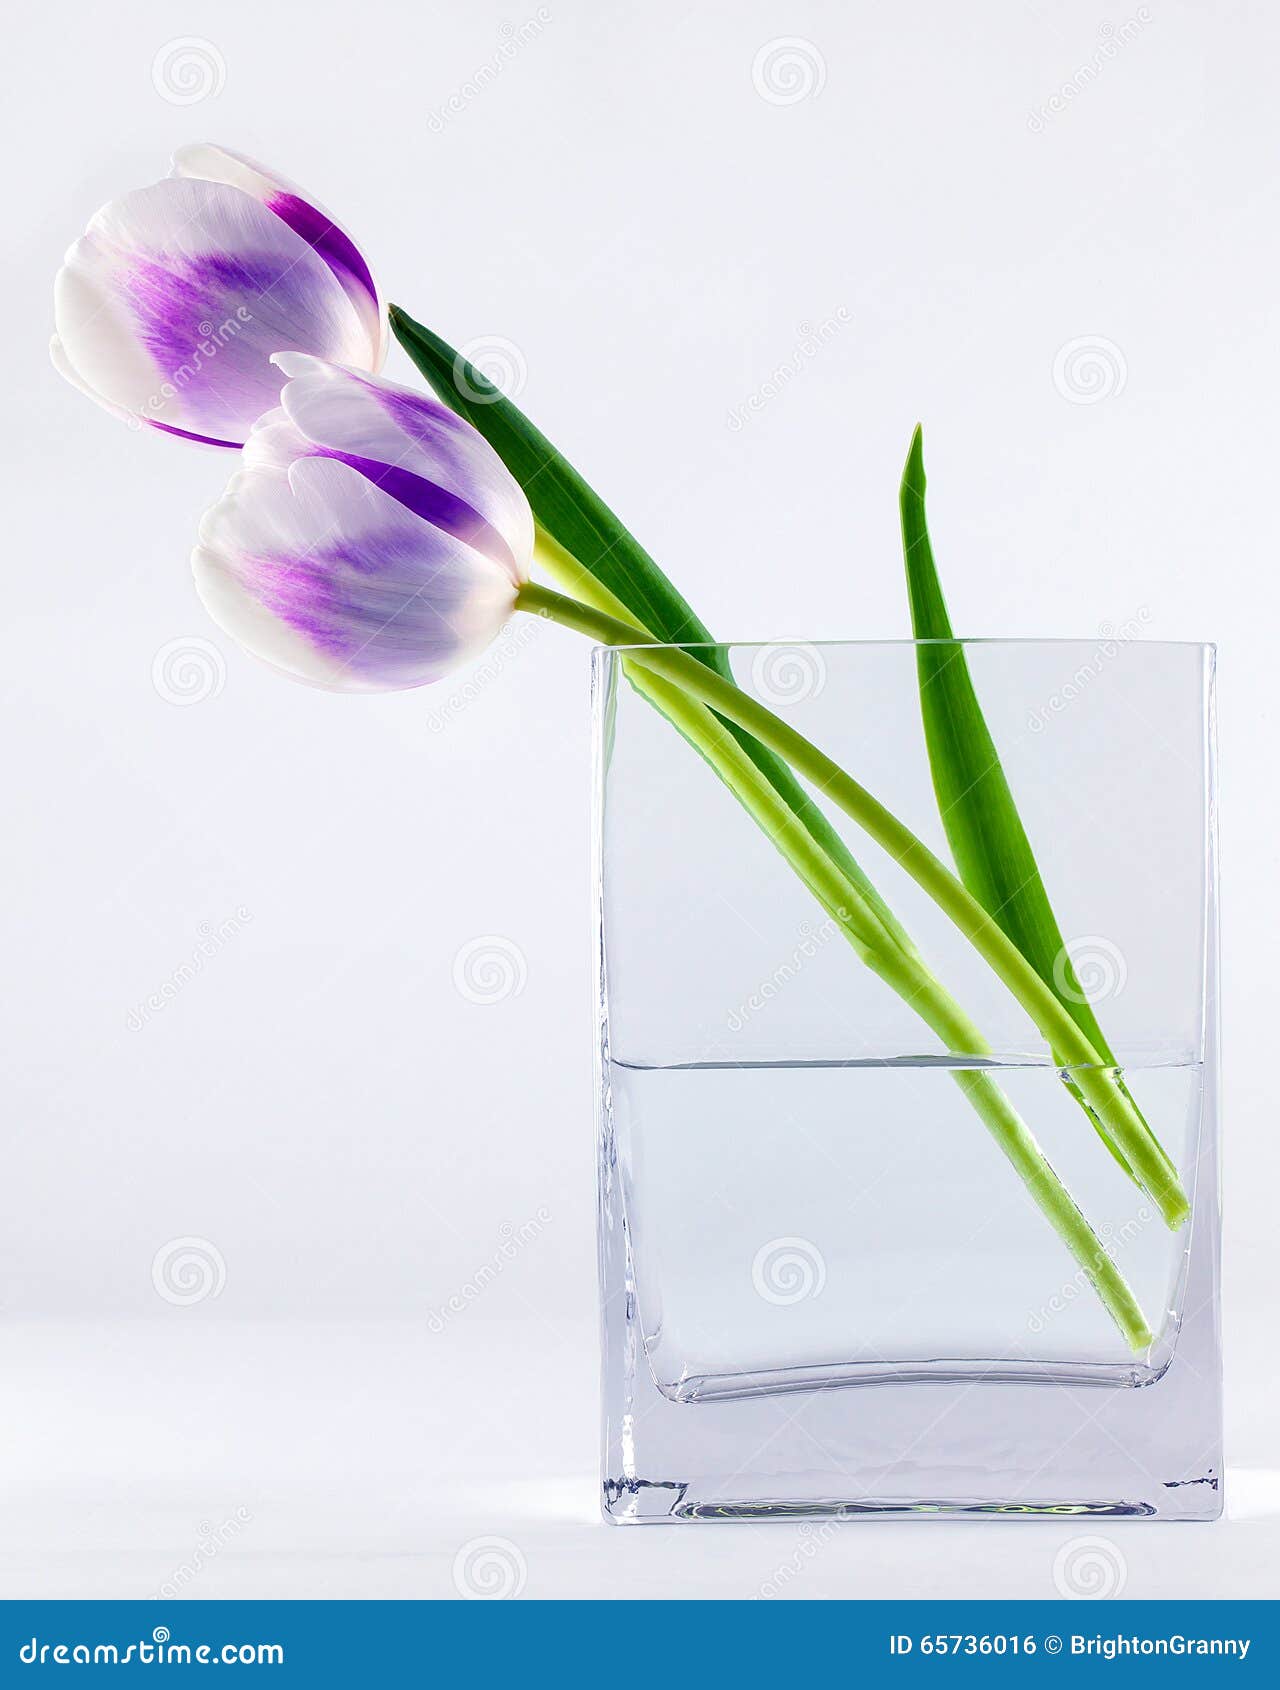 Tulips in a vase stock photo. Image of leaf, love, beauty - 65736016